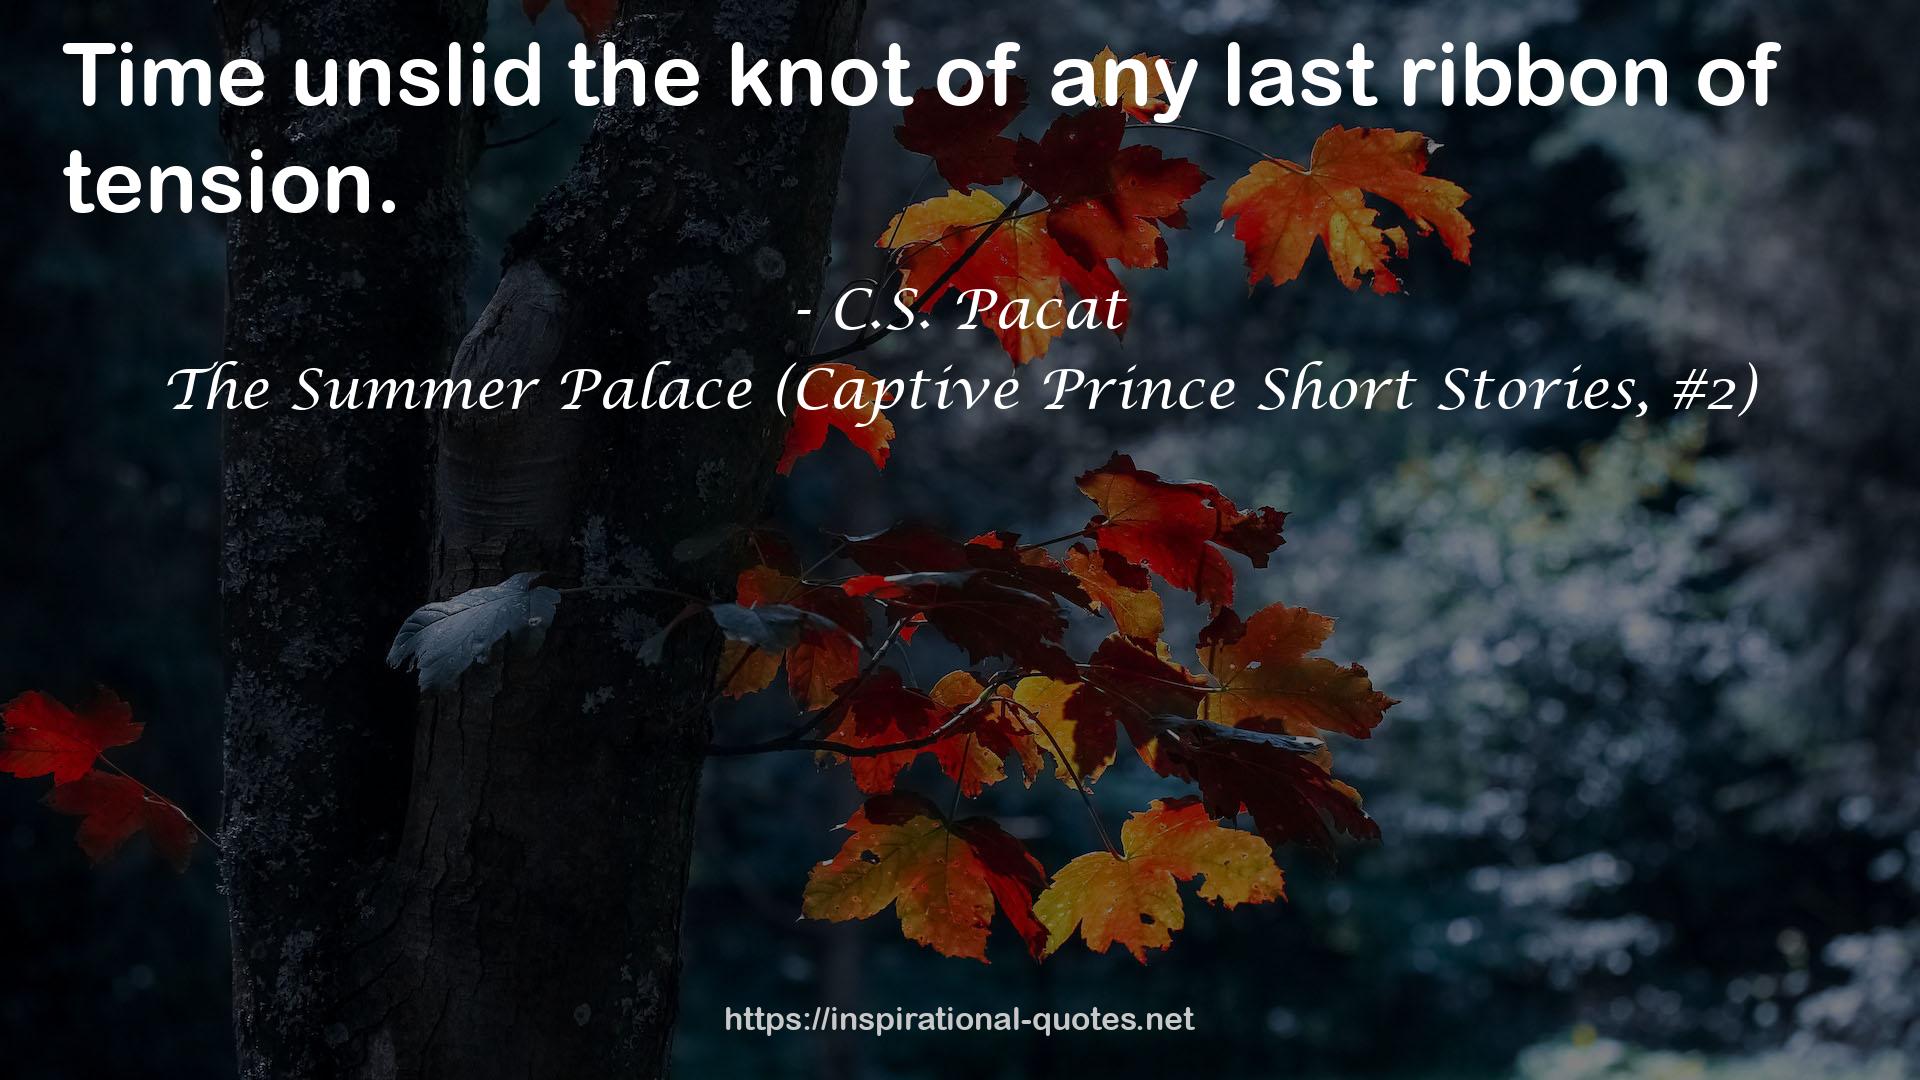 The Summer Palace (Captive Prince Short Stories, #2) QUOTES